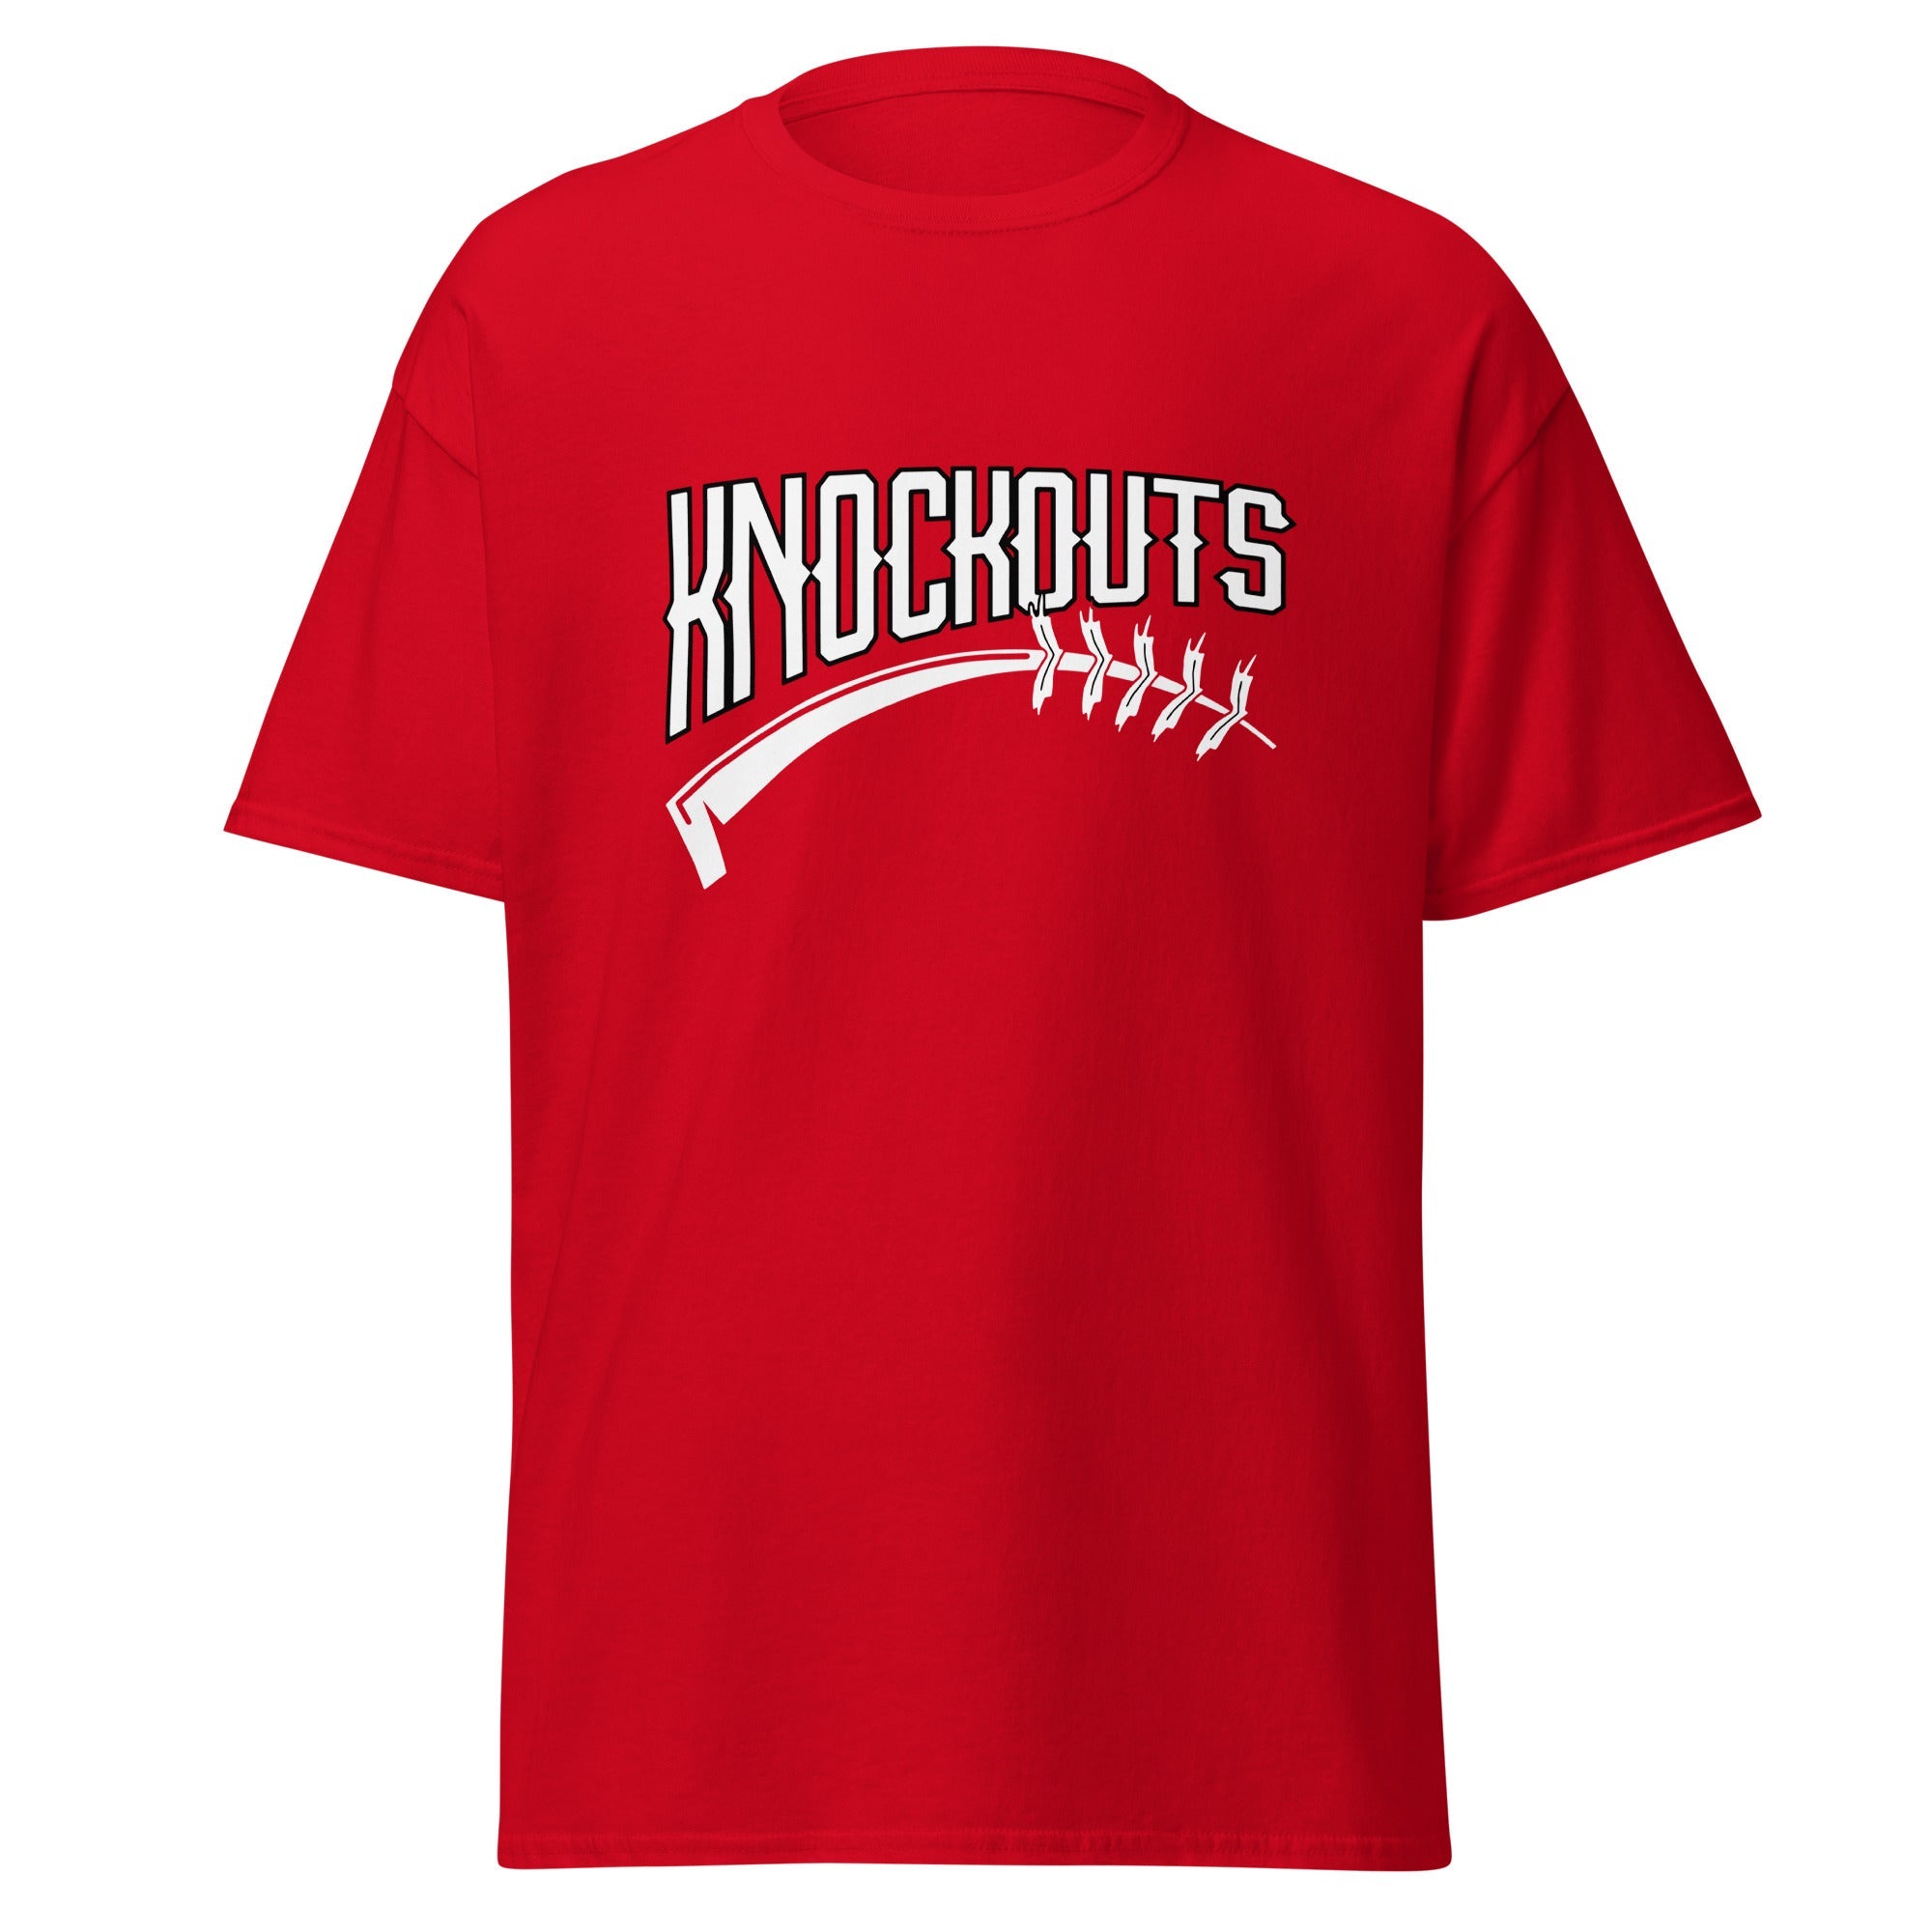 Knockouts Men's classic tee